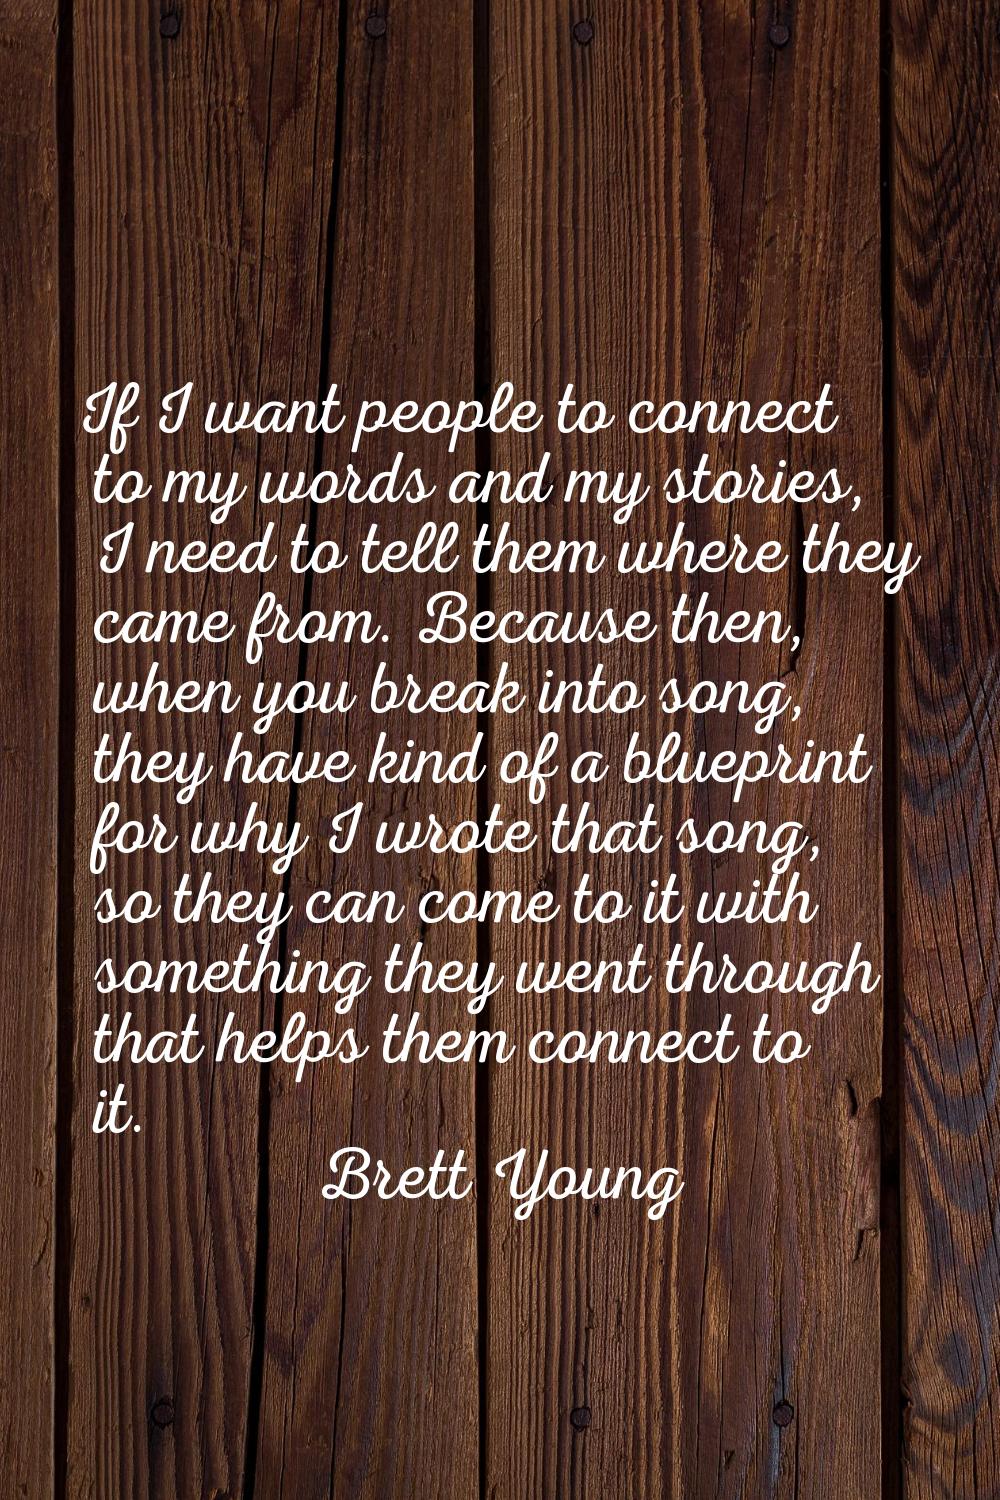 If I want people to connect to my words and my stories, I need to tell them where they came from. B